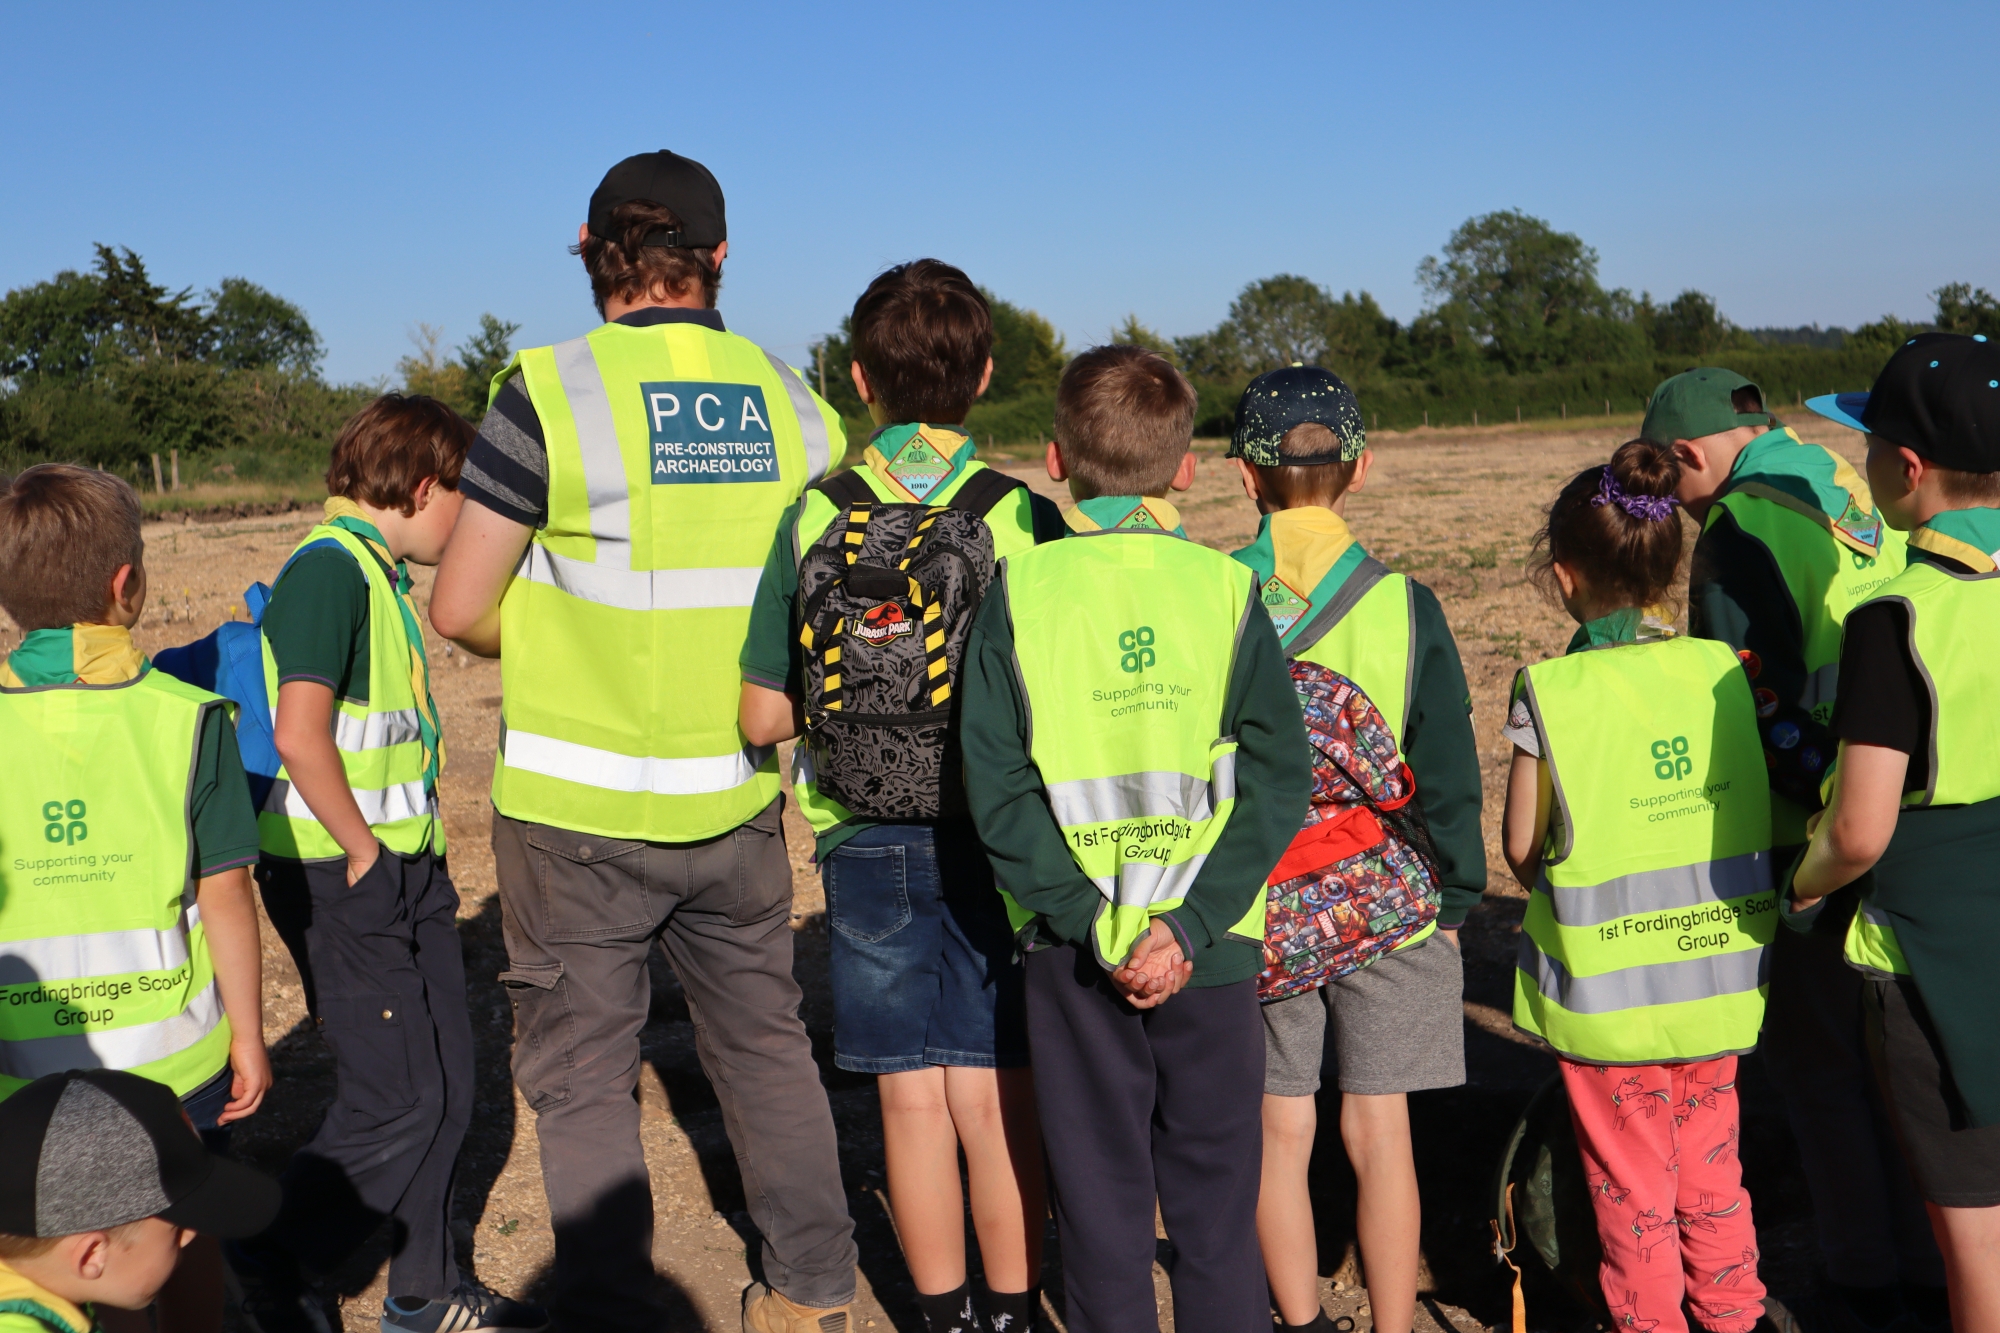 Cubs Scouts were treated to seeing a live archaeological dig site at Whitsbury Green, Fordingbridge